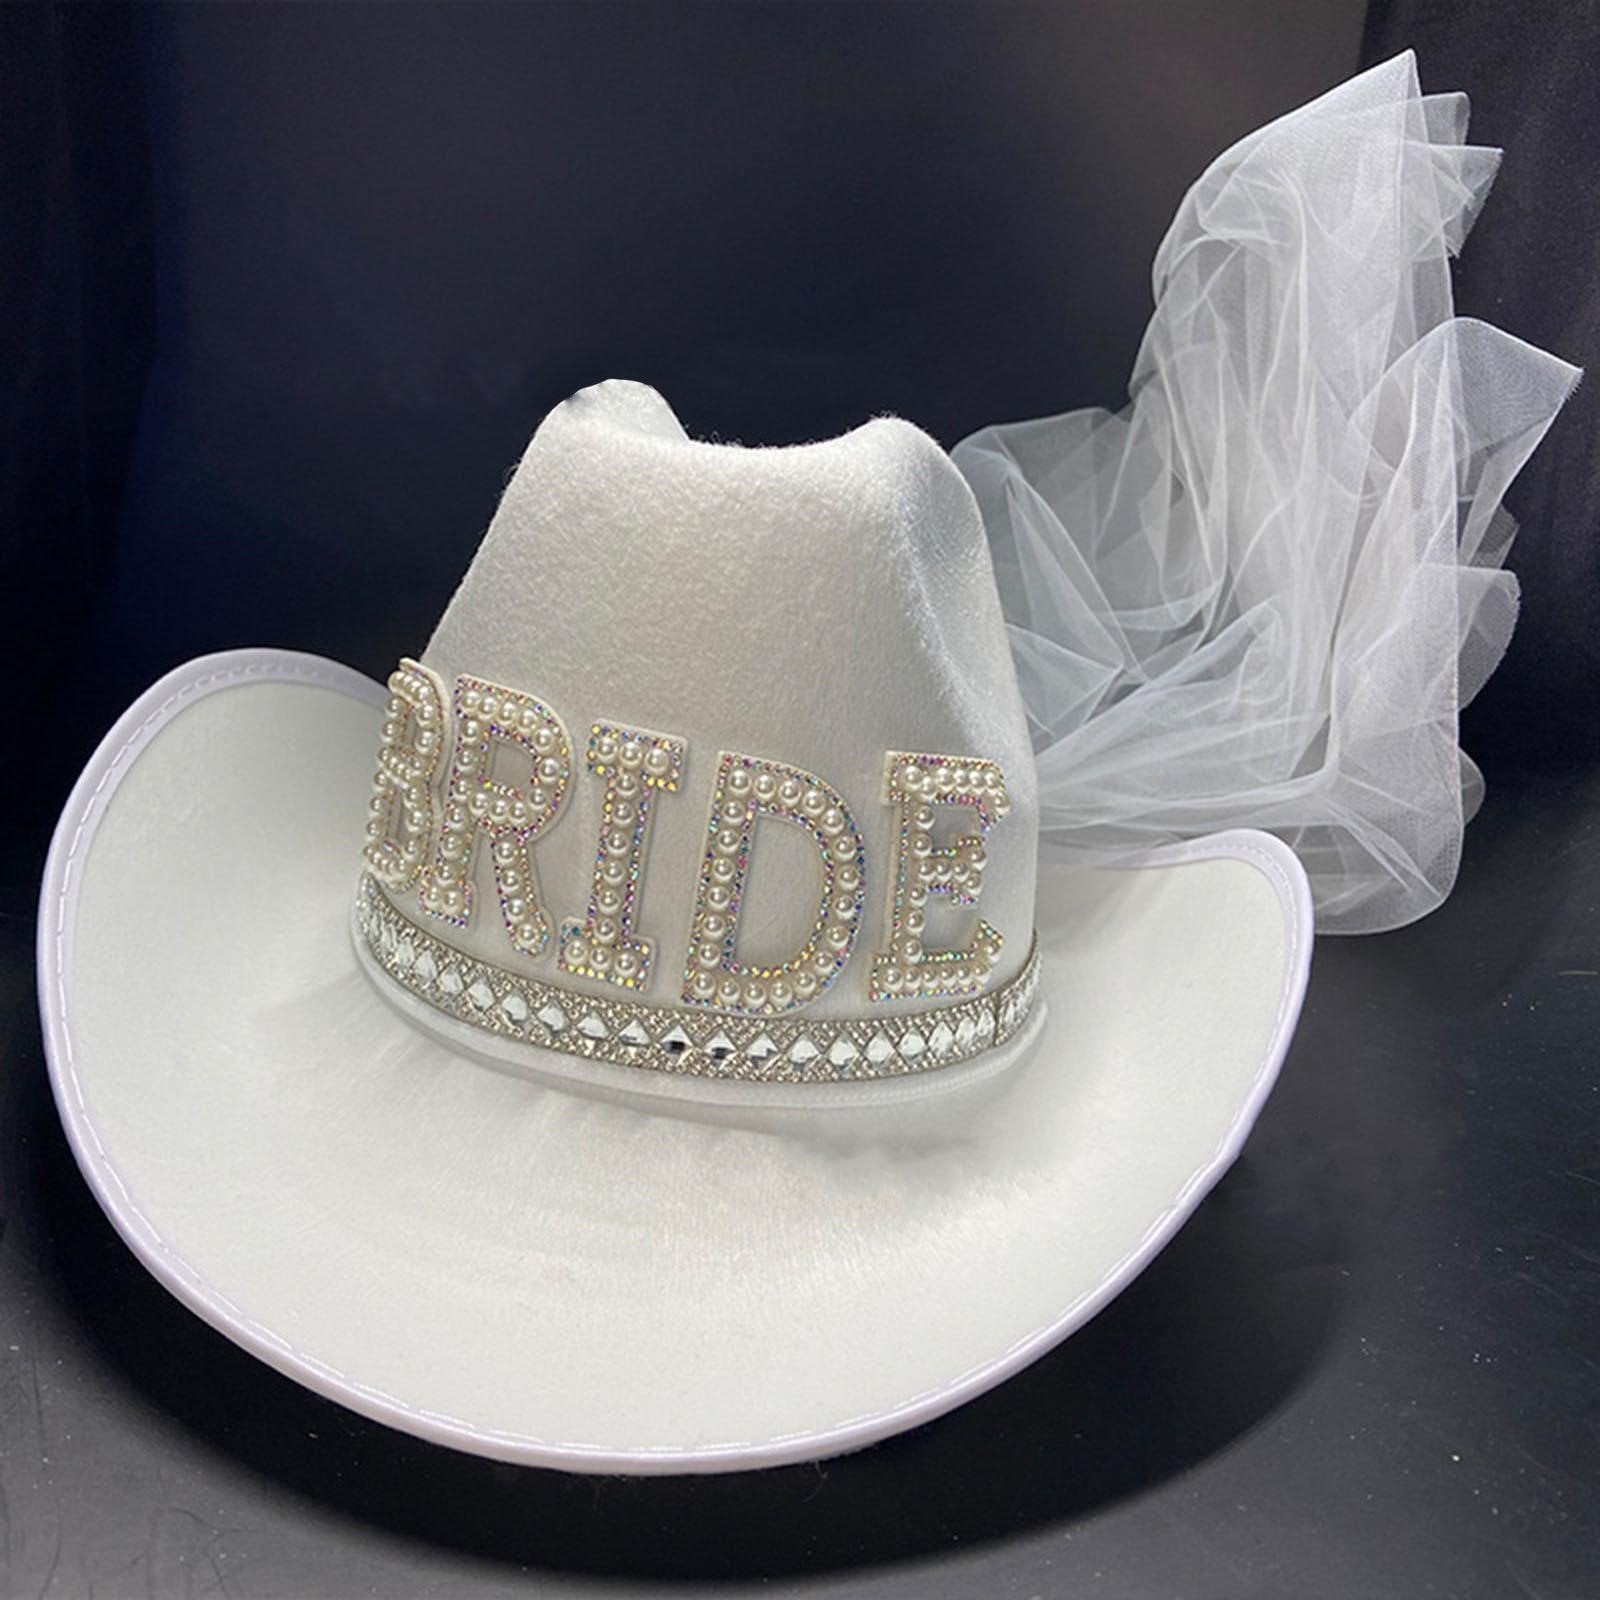 Hat Cowboy/Cowgirl White Bride With Veil Deluxe